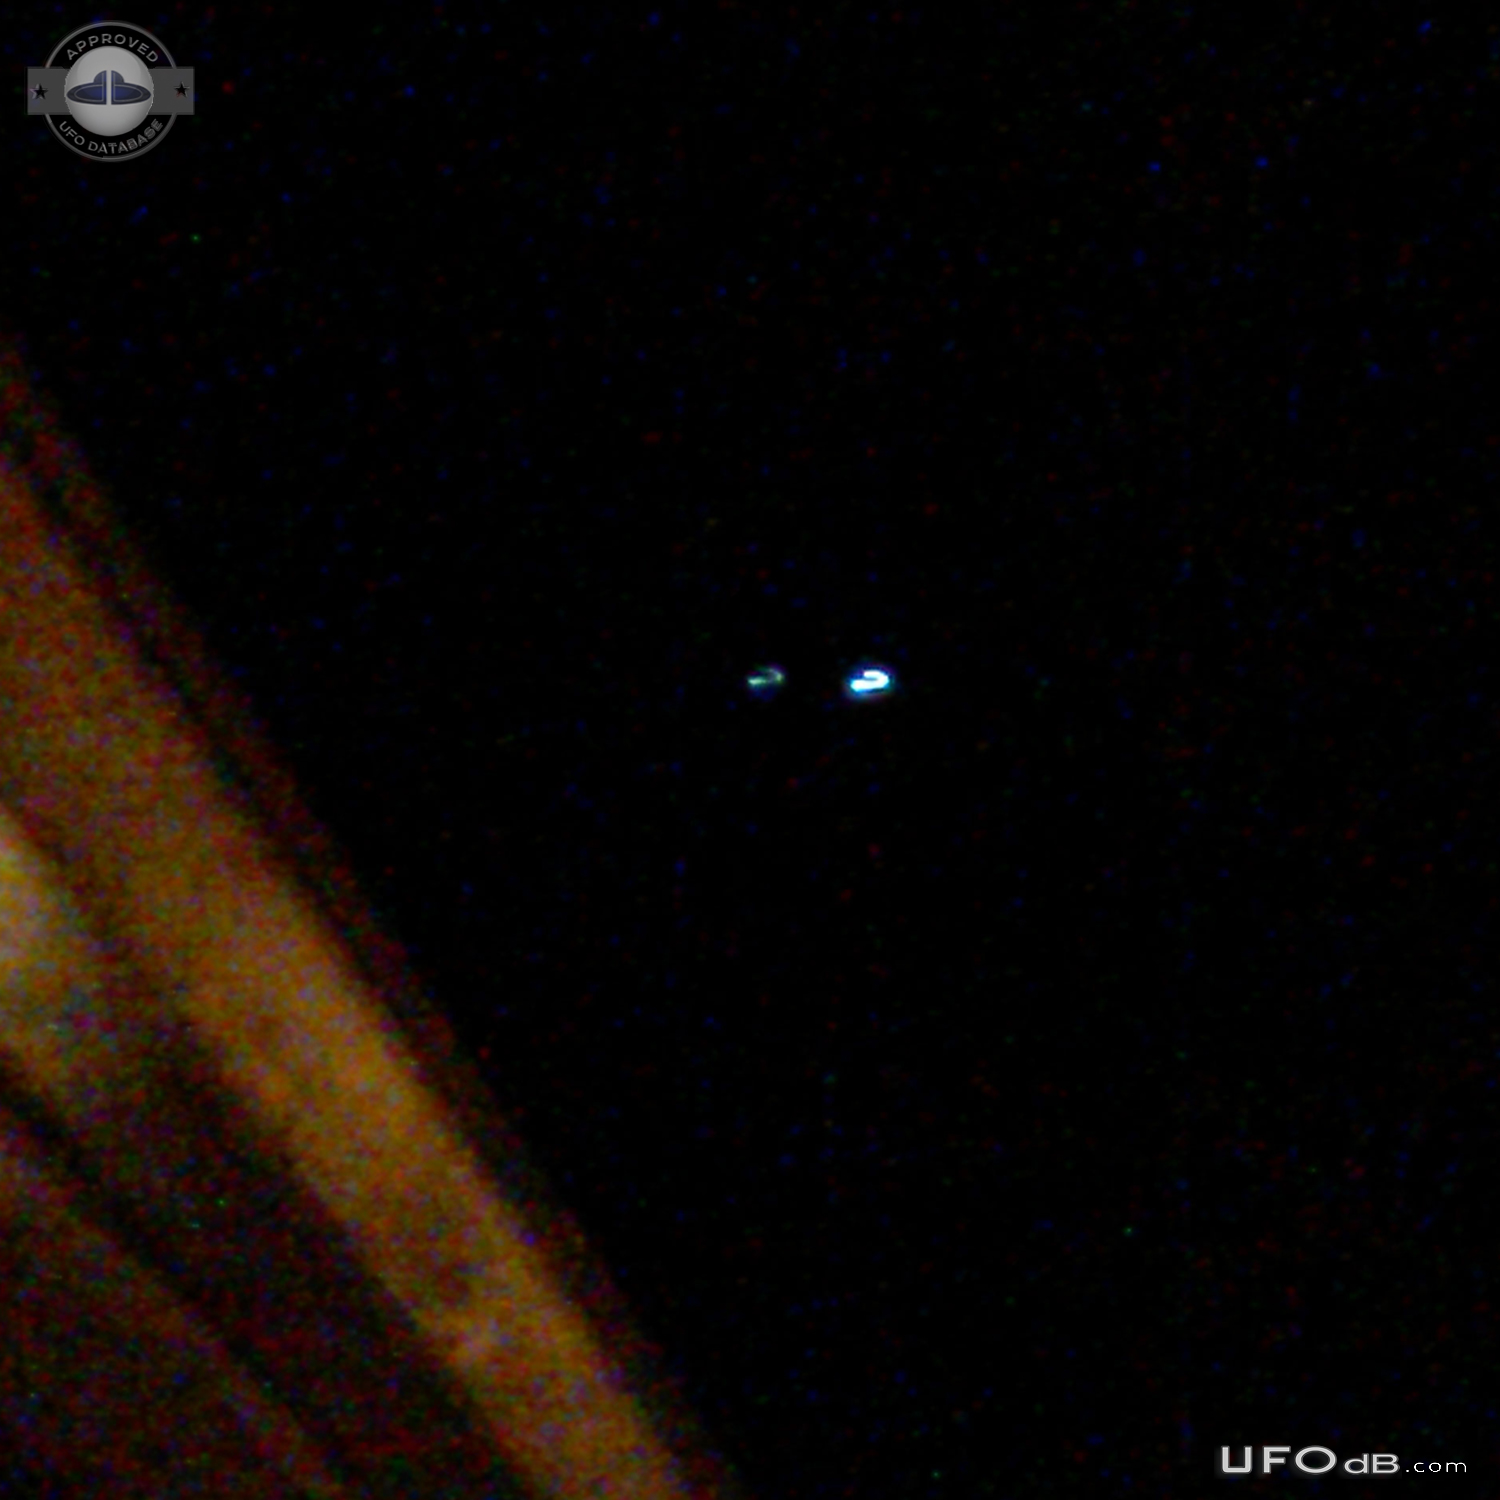 2 bright lights like a supernova equal distance apart with one brighte UFO Picture #742-2